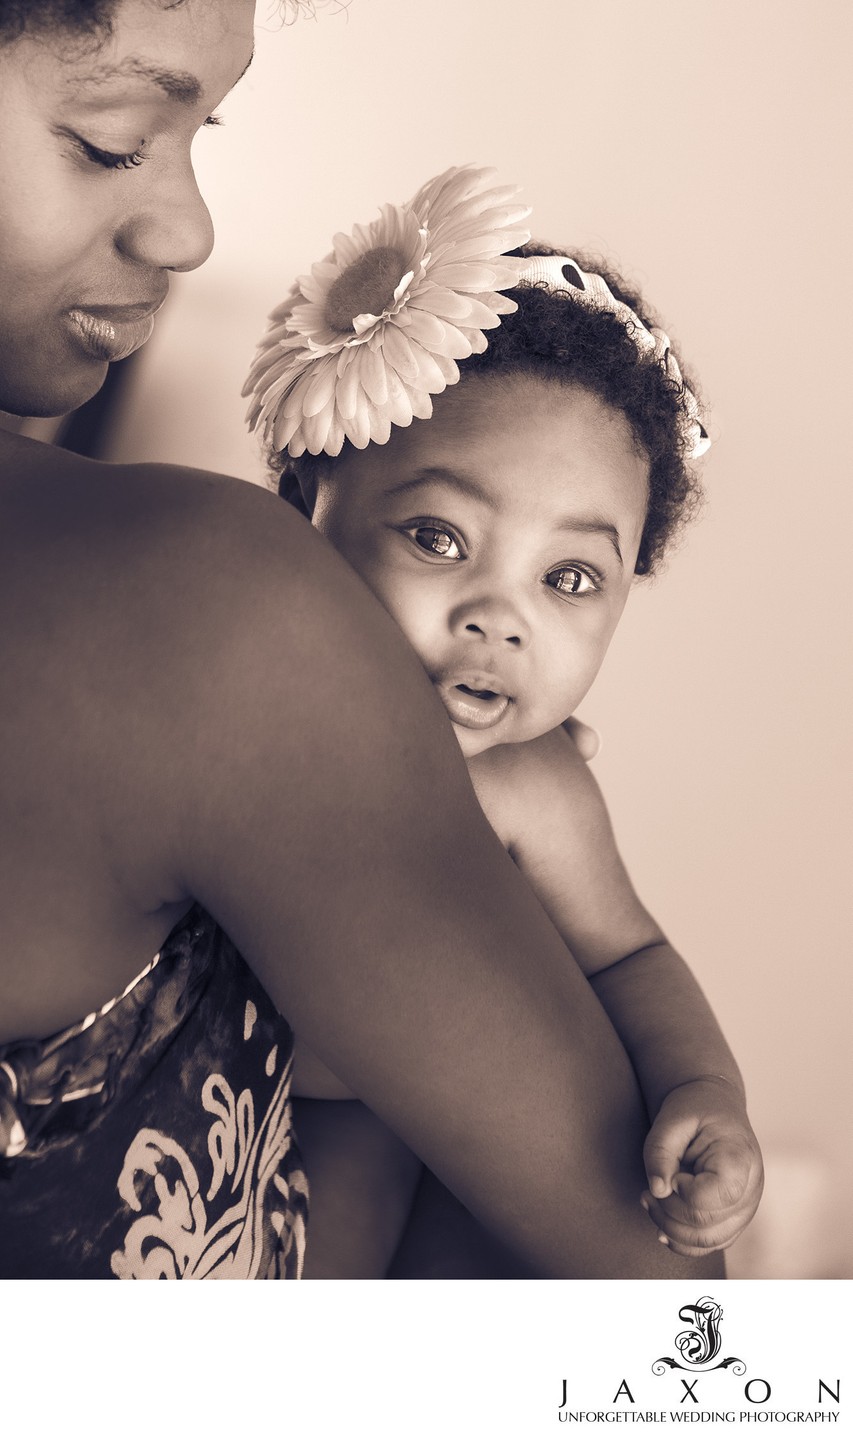 Sepia Serenity: Mother and Child Portrait